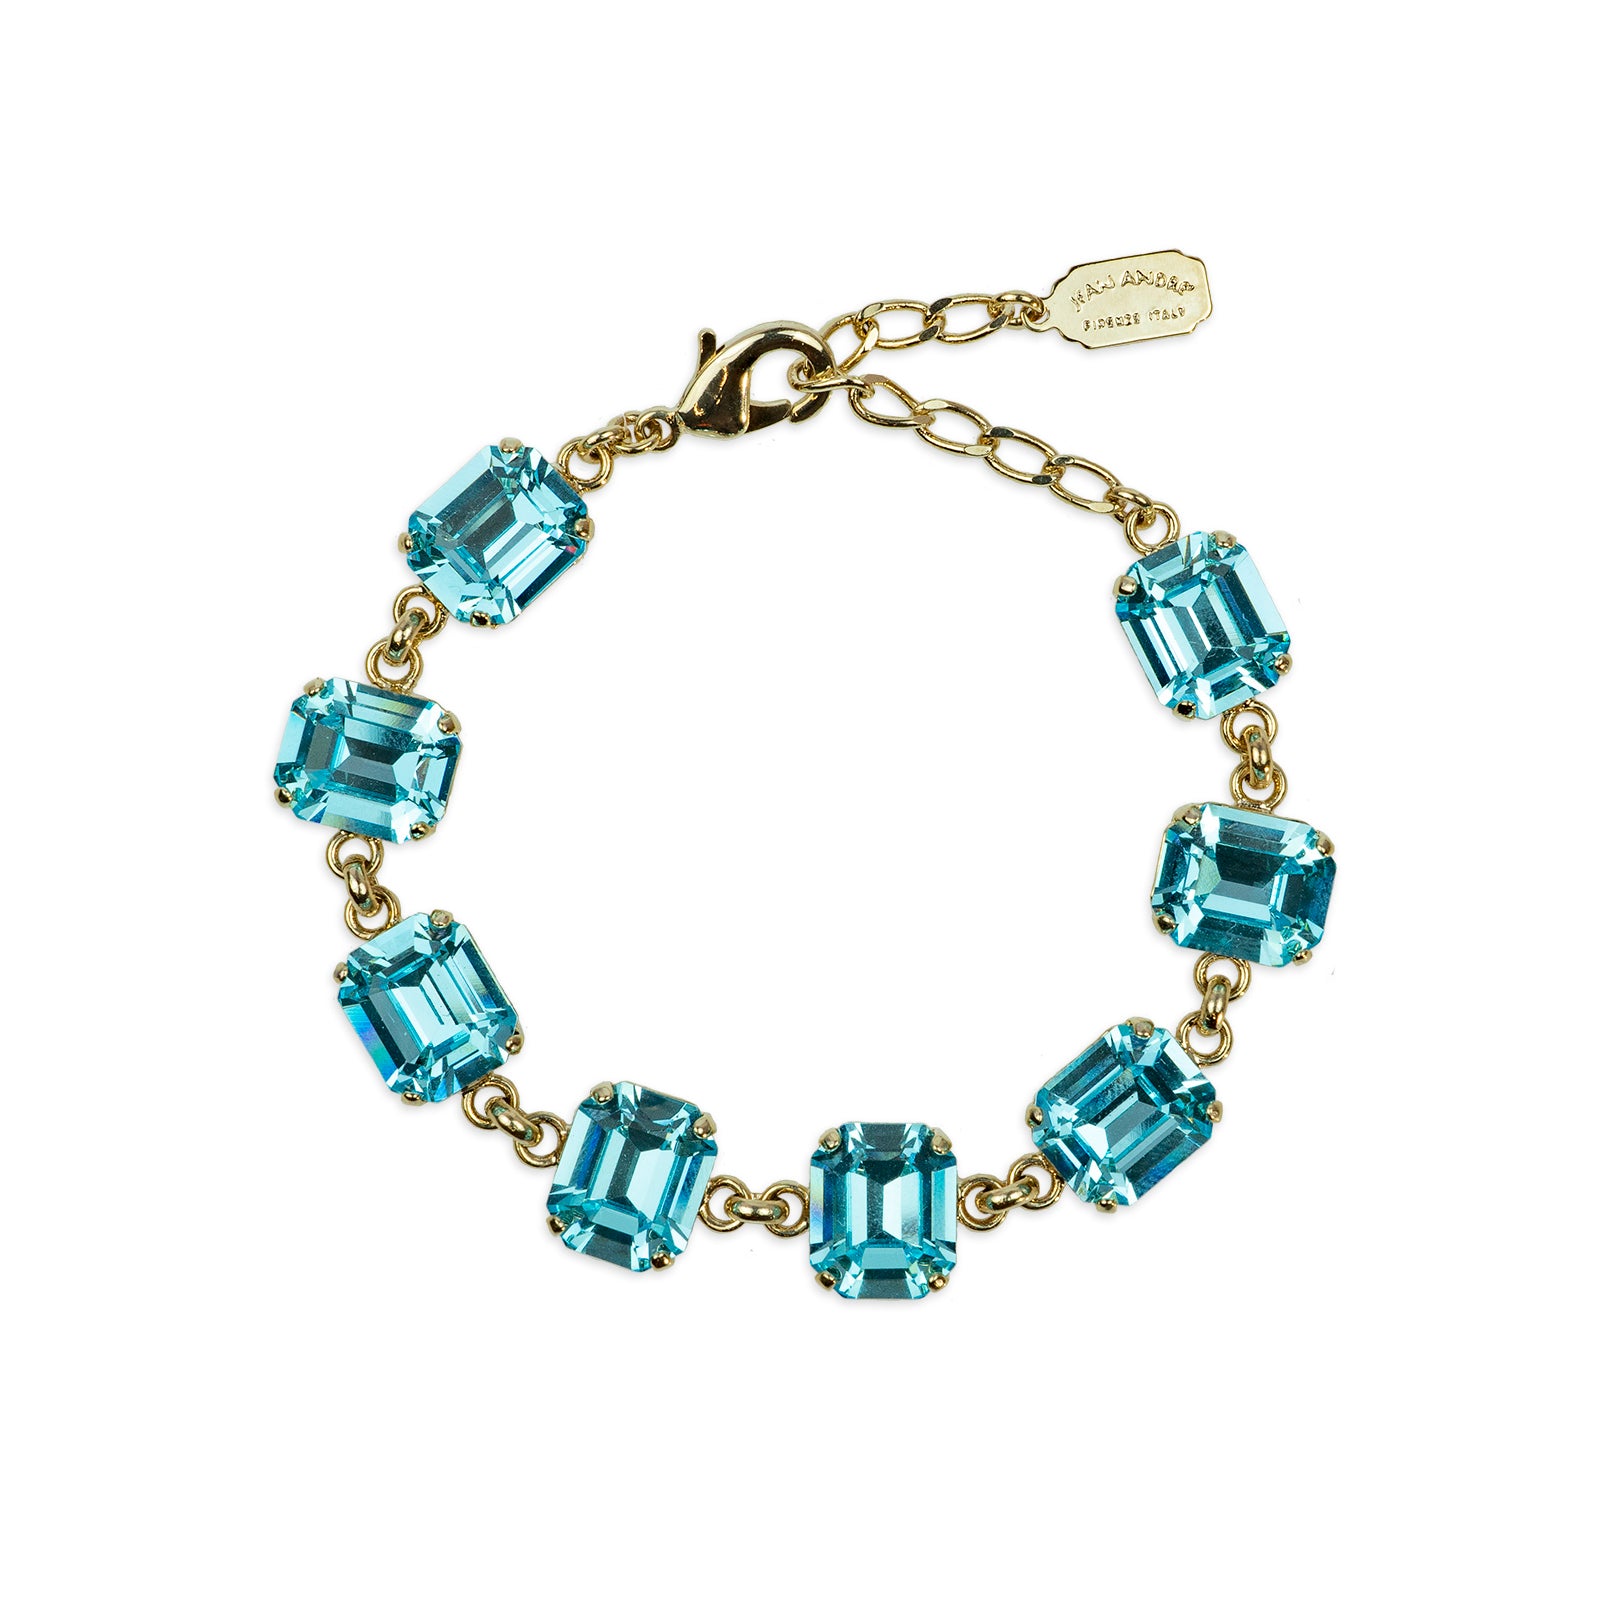 Bracelet with colored crystals